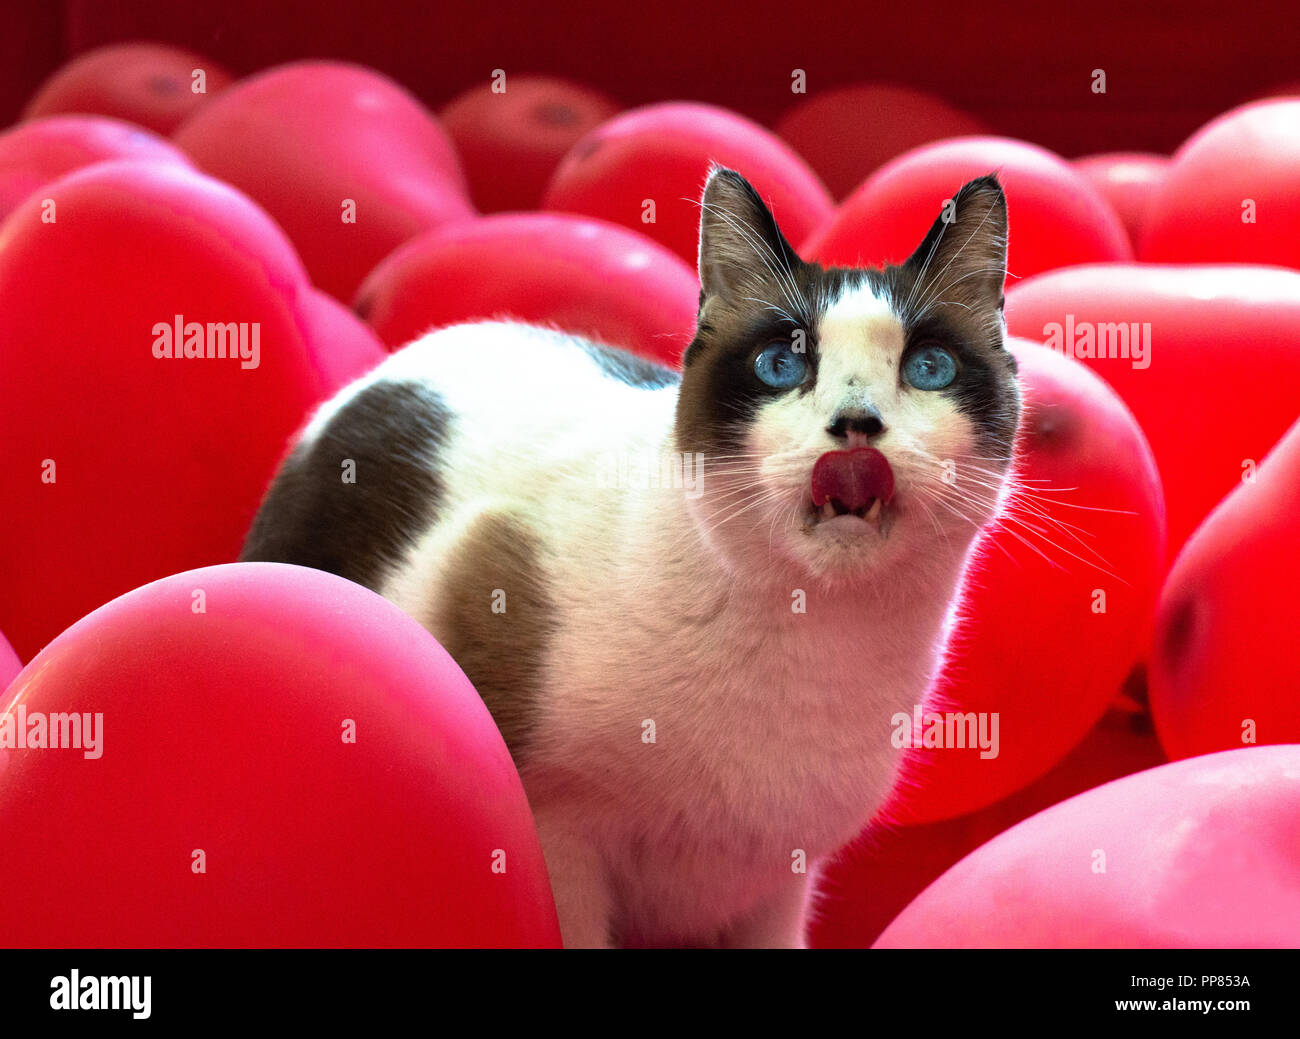 White Snowshoe Cat with blue eyes sticking his tongue out, surrounded with red, heart shaped balloons. Stock Photo